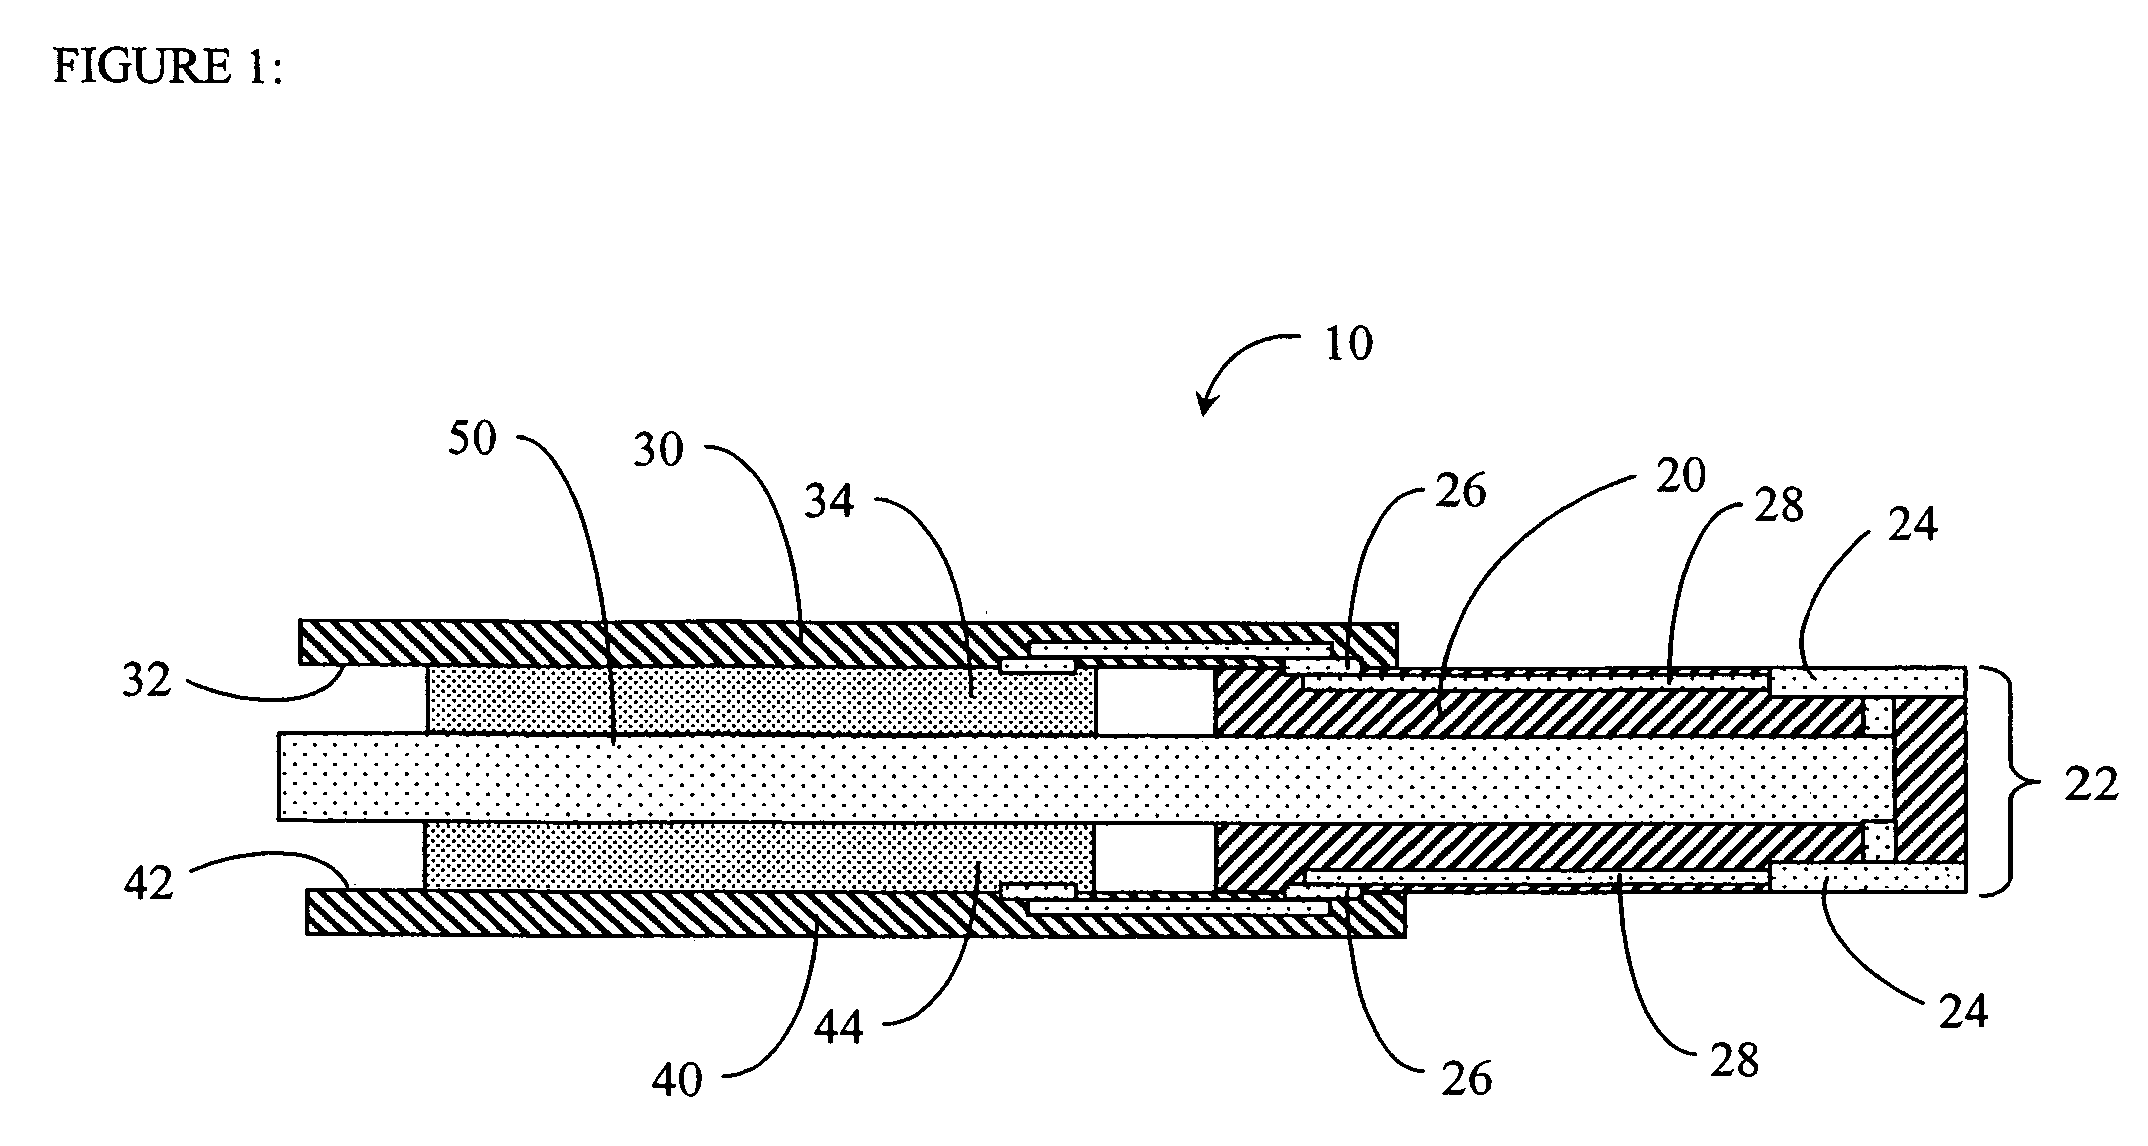 High density memory module using stacked printed circuit boards